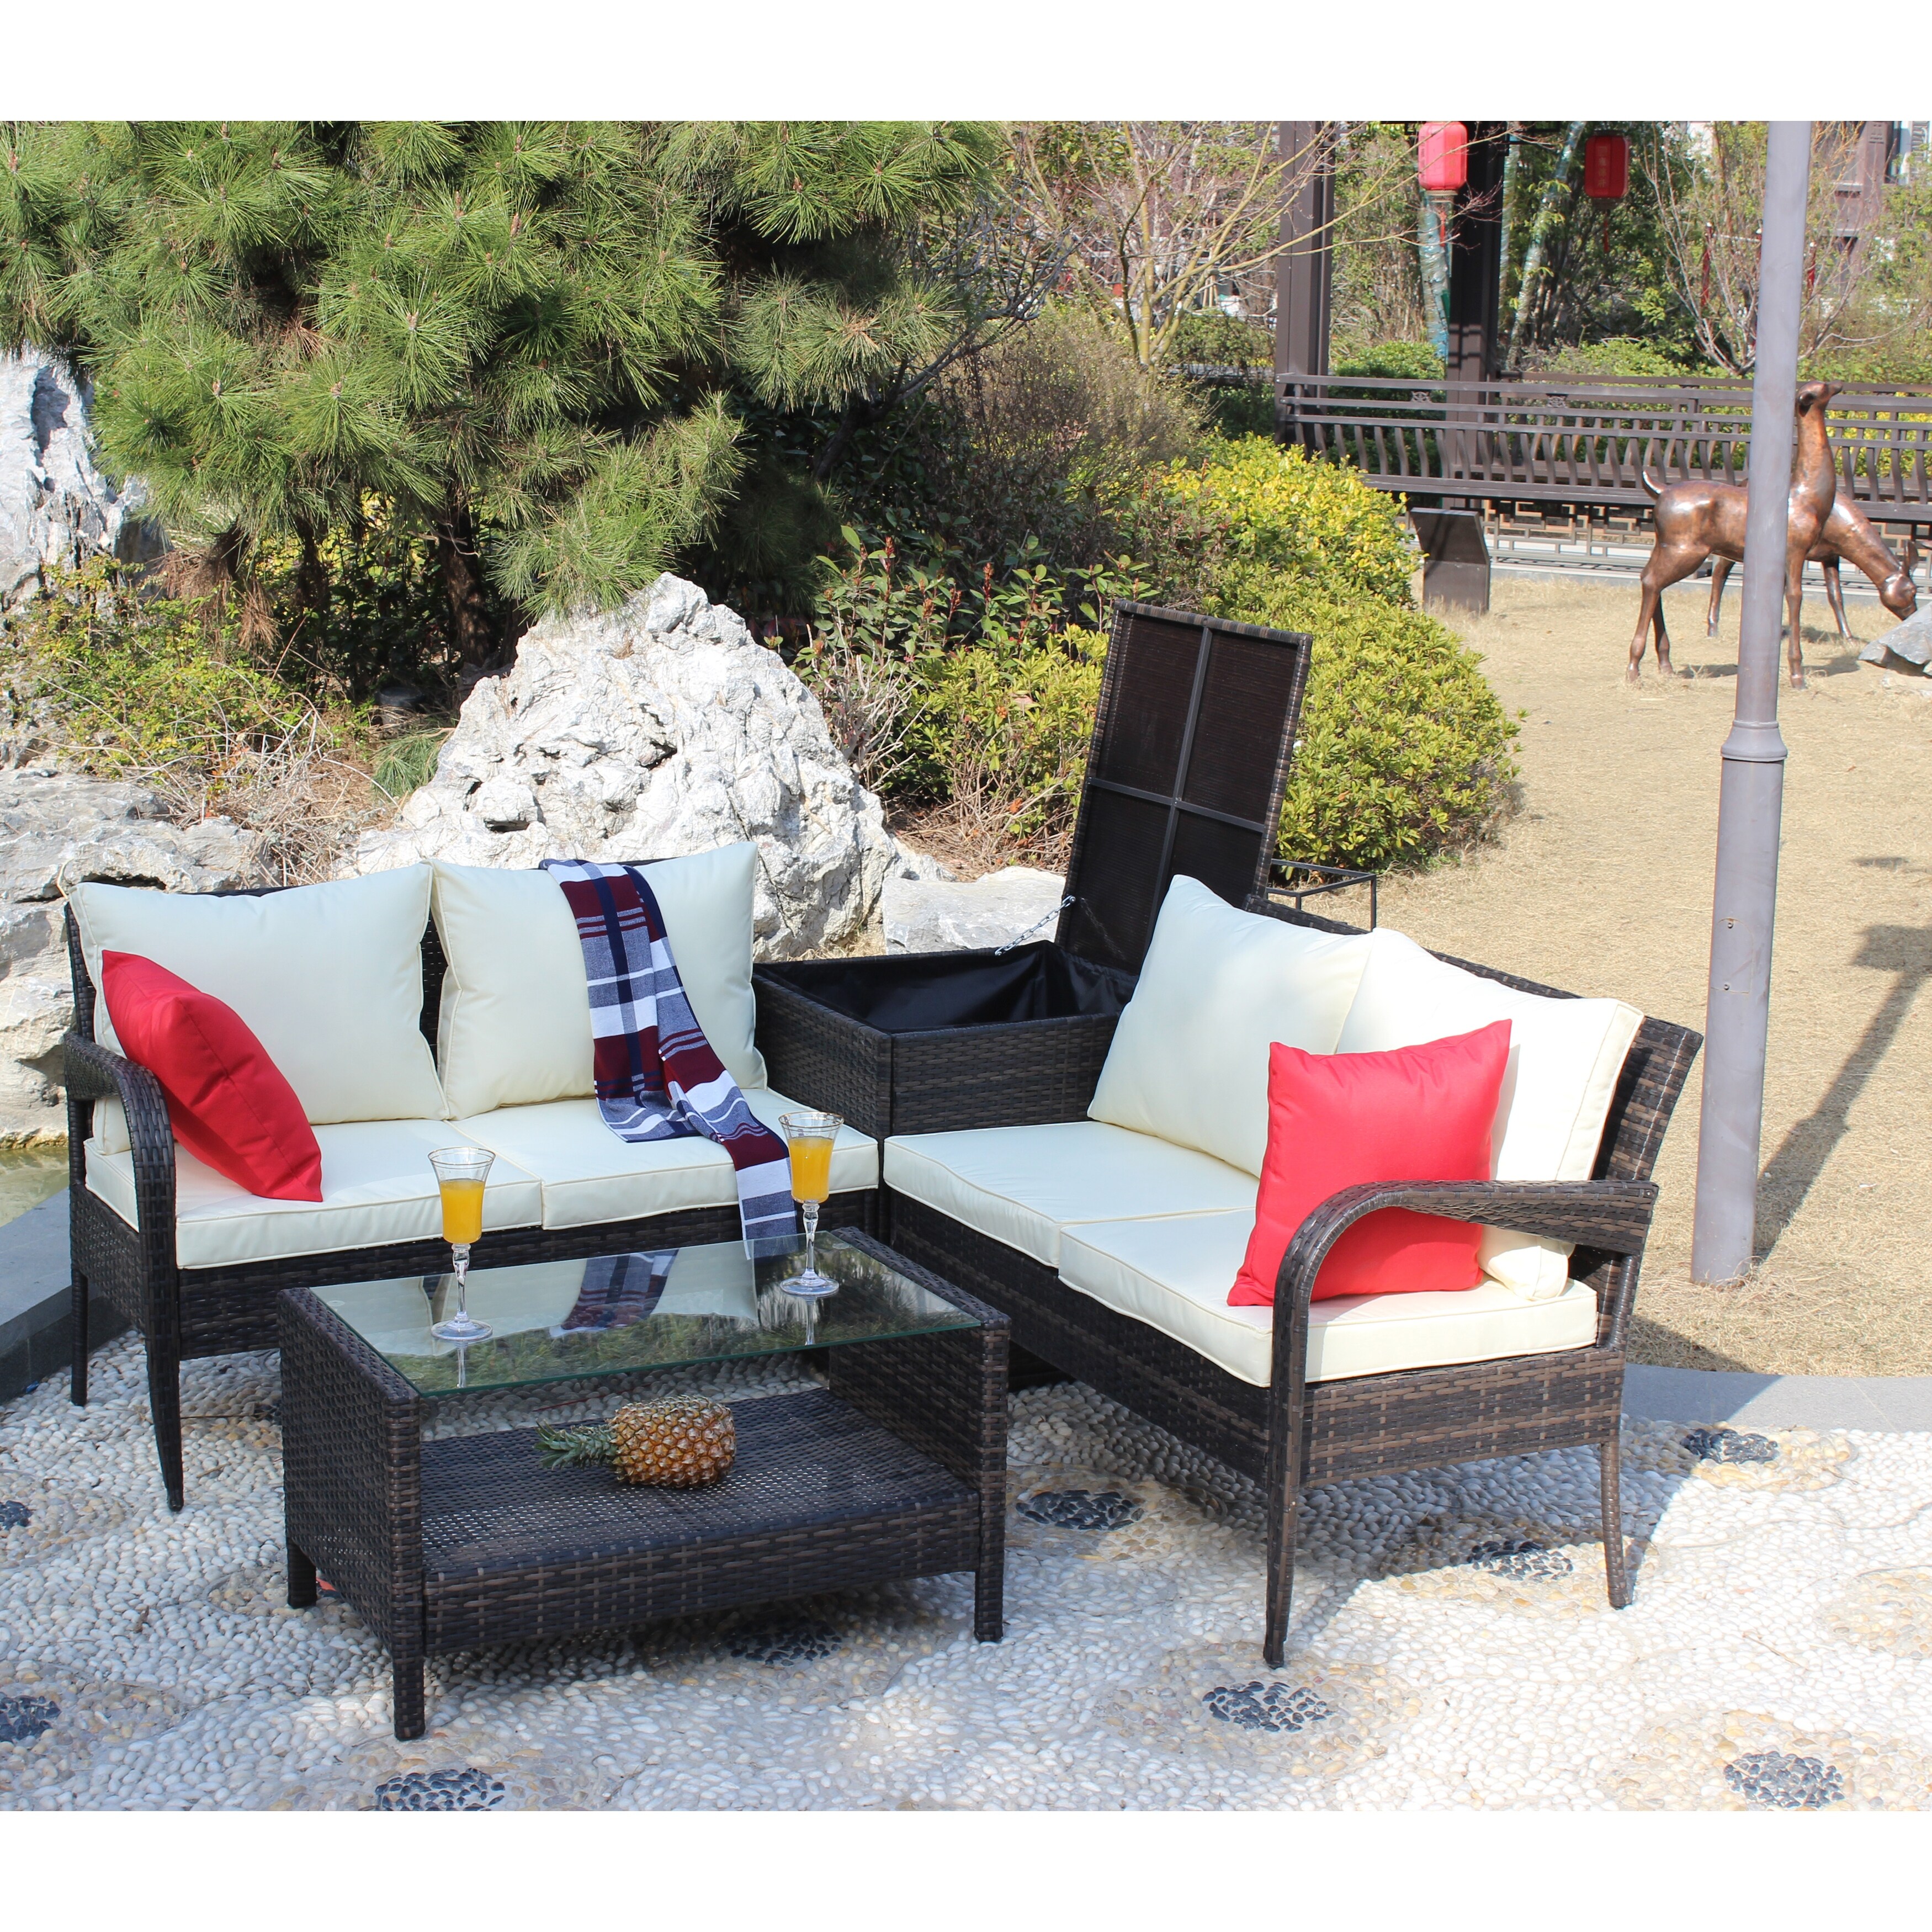 4-pieces Outdoor Garden Patio Furniture Sets For 4  Pe Rattan Wicker Sectional Cushioned Sofa Sets For Balcony  Yard and Garden